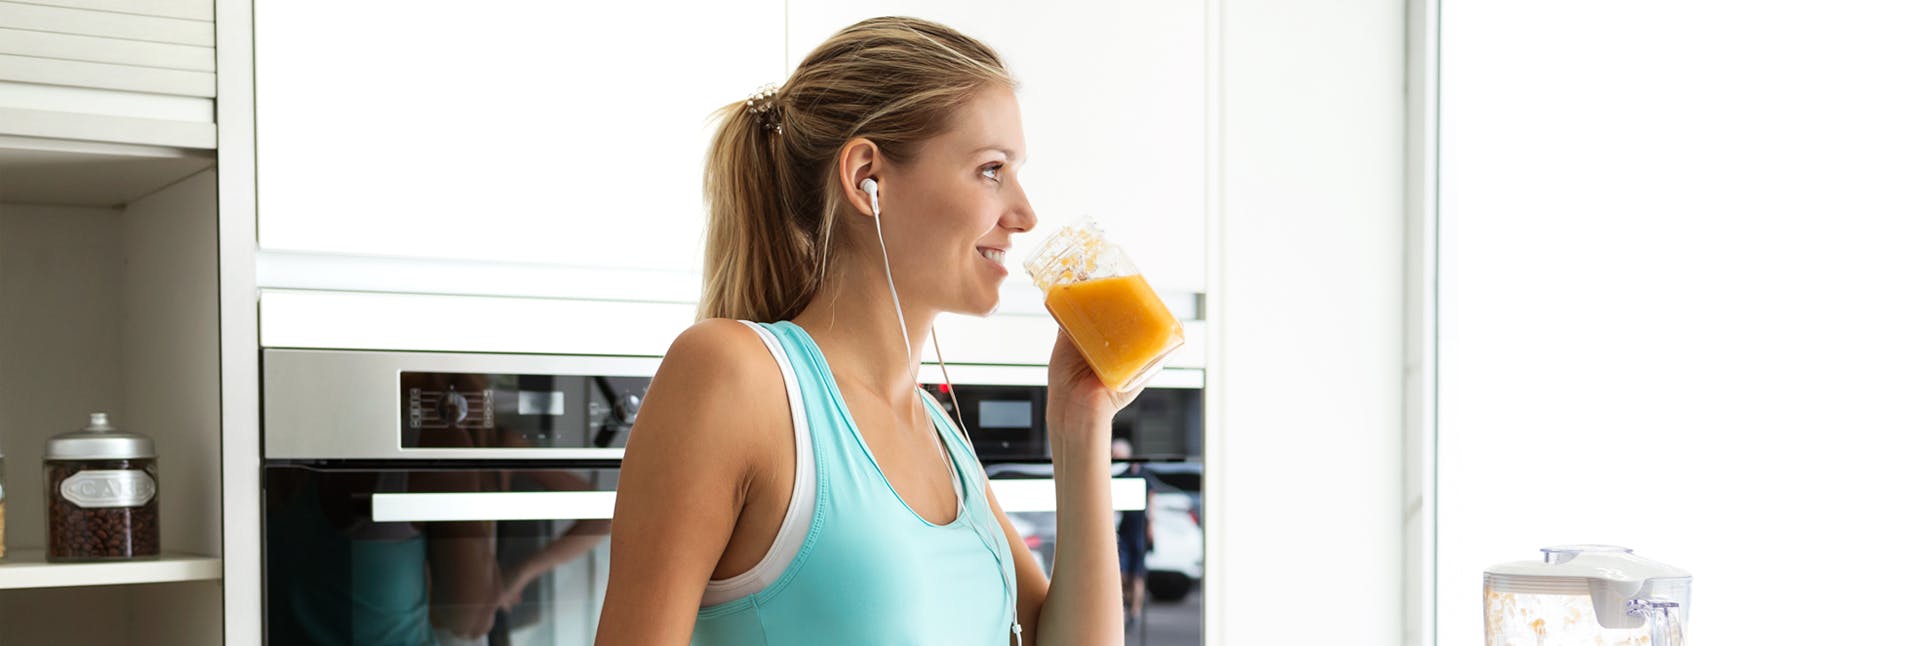 Athletic woman drinking a smoothie and listening to music